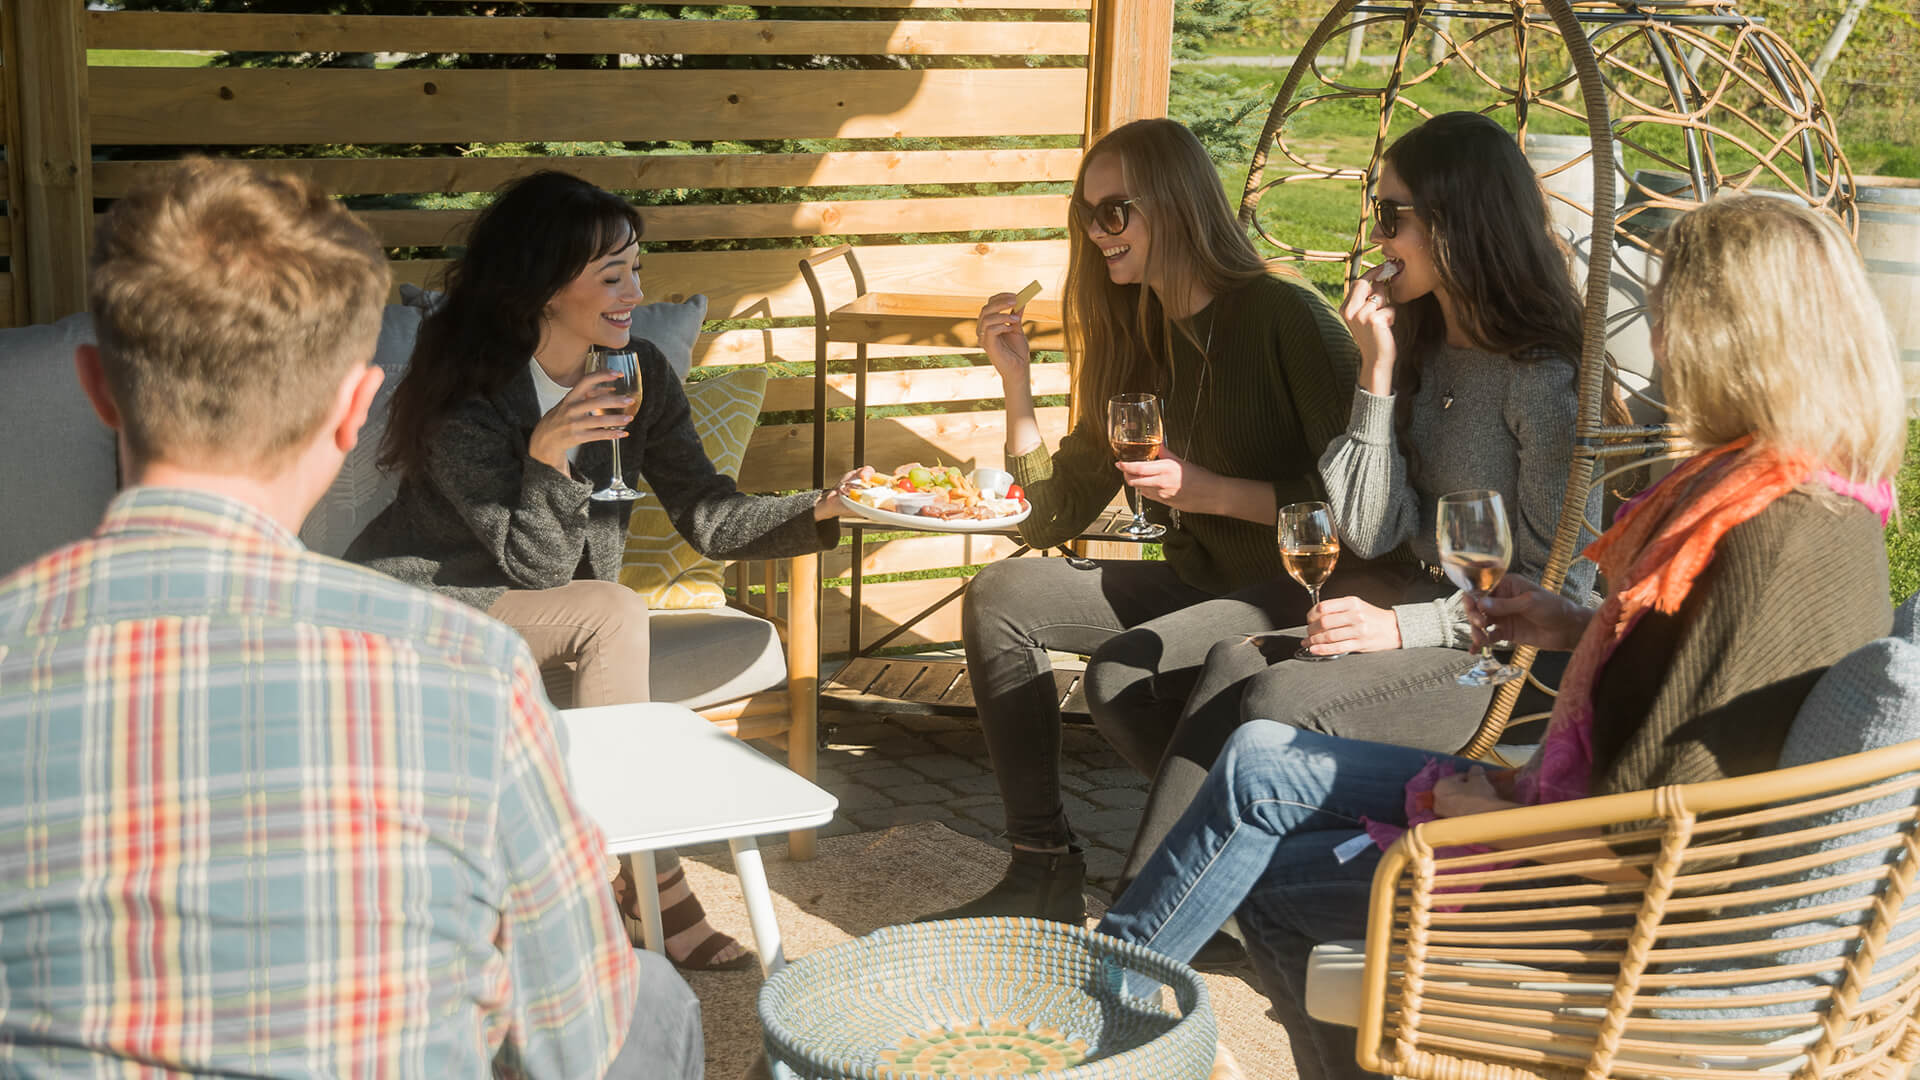  A group of women enjoying a glass of wine at a winery.